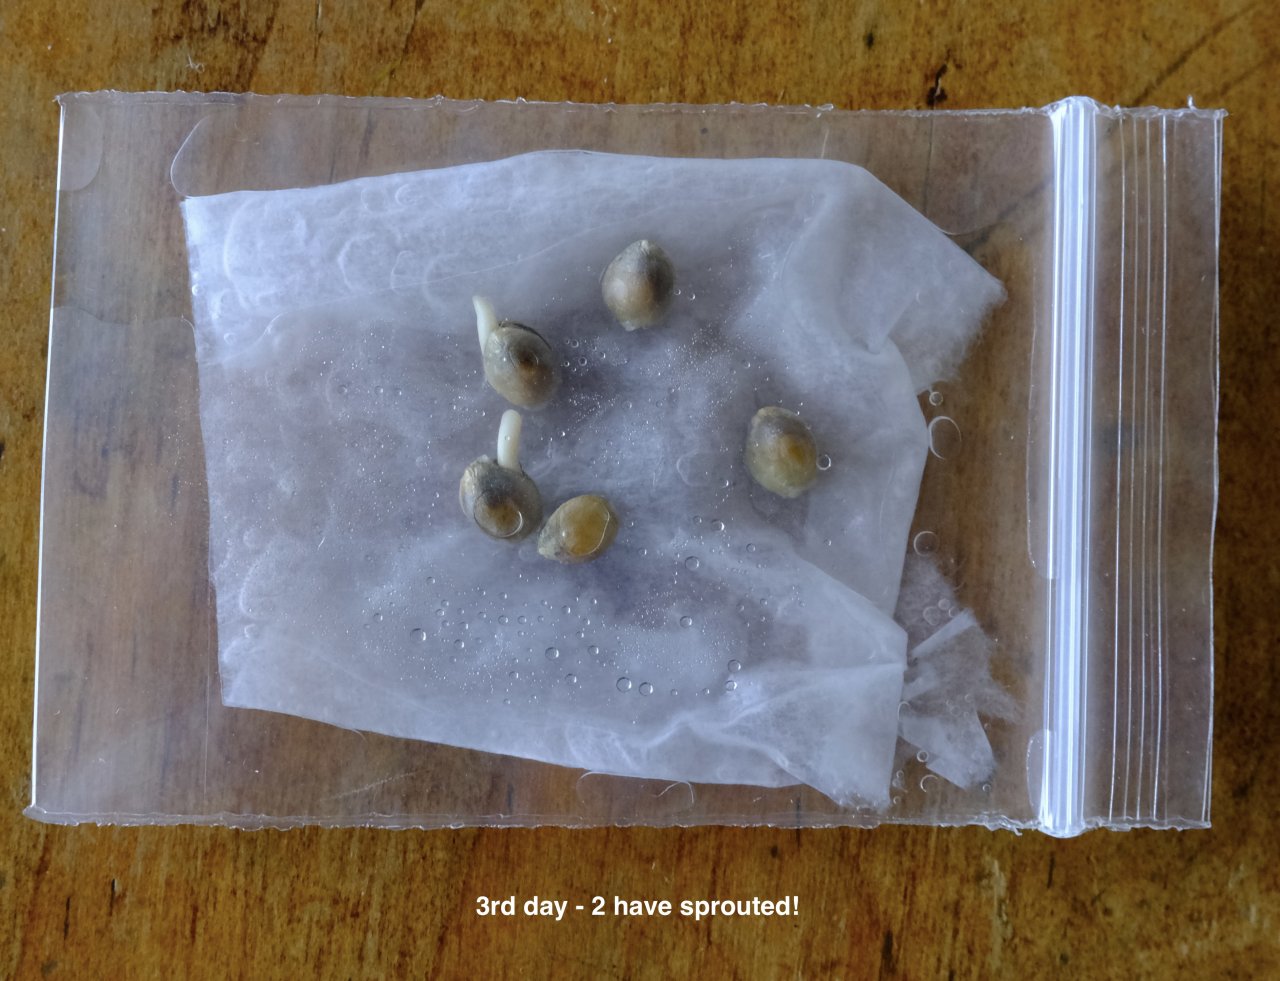 Attempt to germinate immature Mulanje seeds - day 3